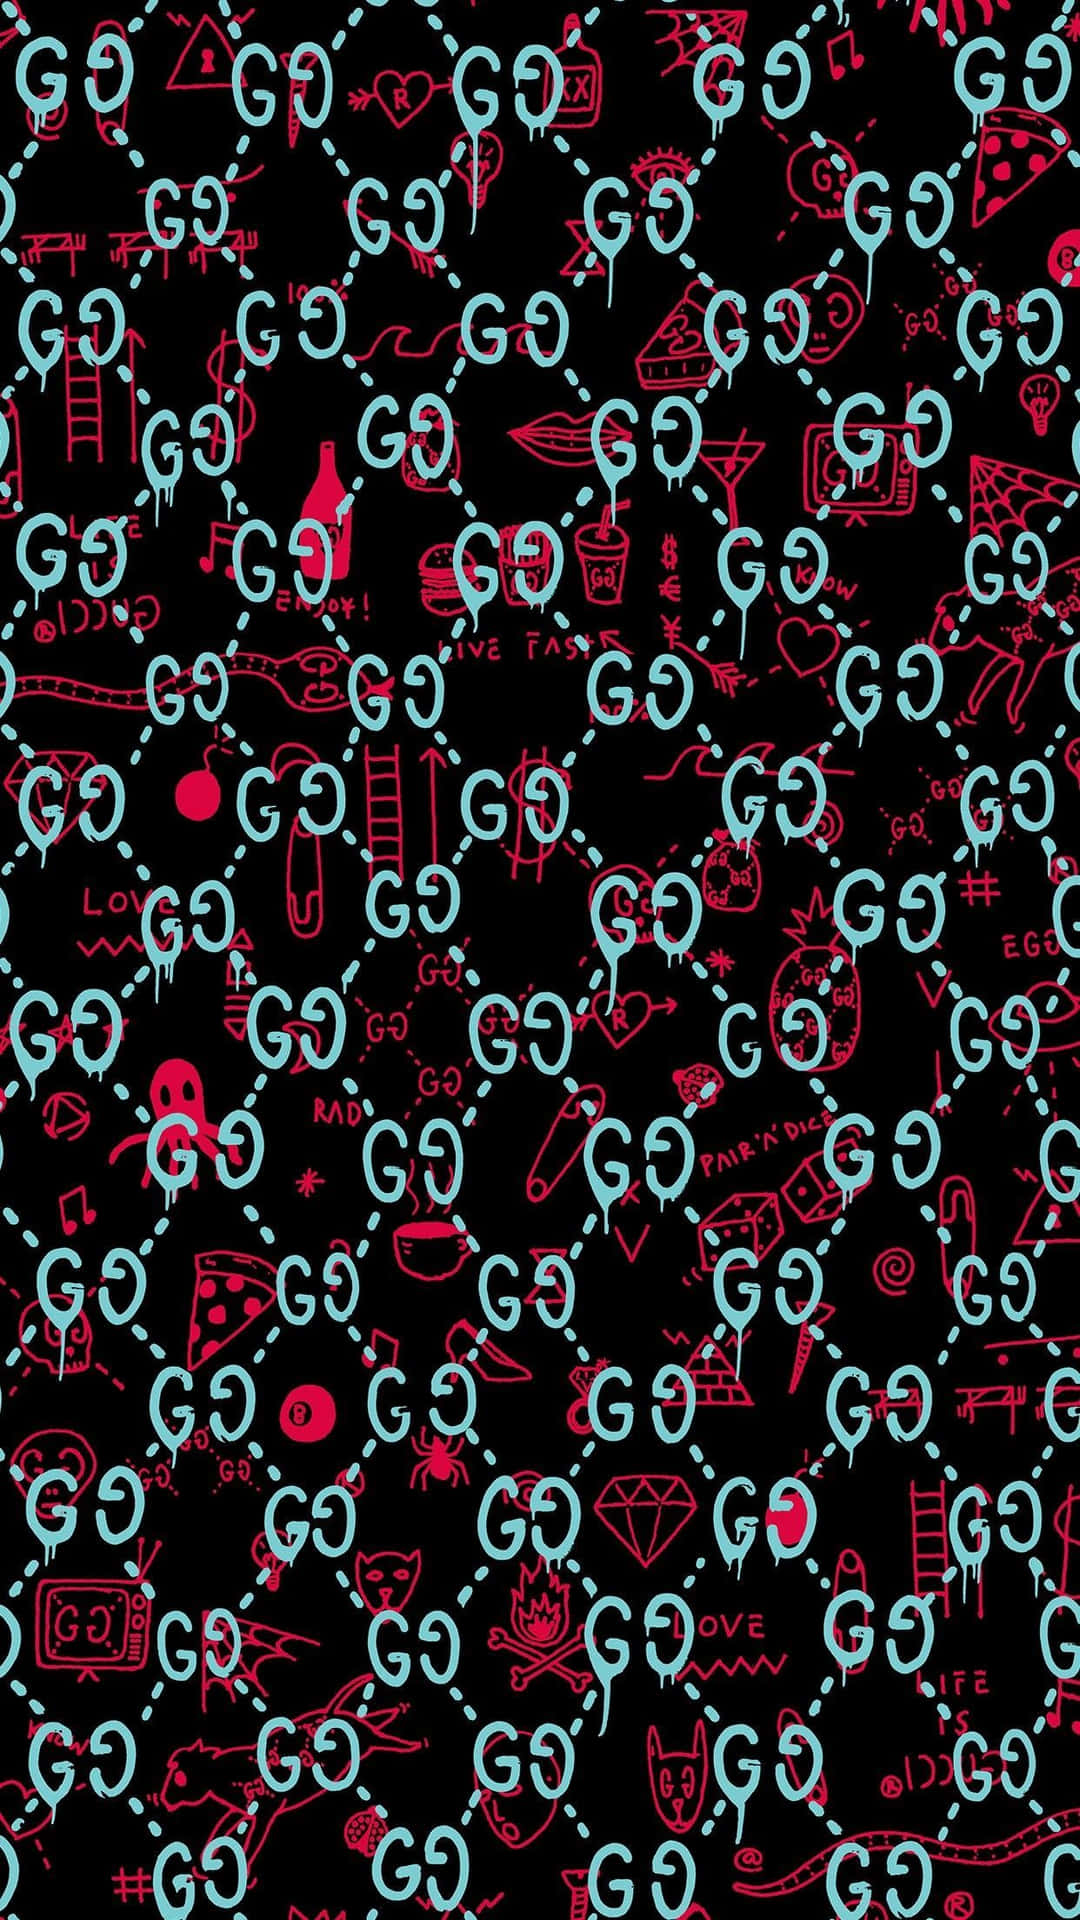 Pink Gucci Wallpaper for IPhone  Iphone wallpaper girly, Apple watch  wallpaper, Iphone wallpaper